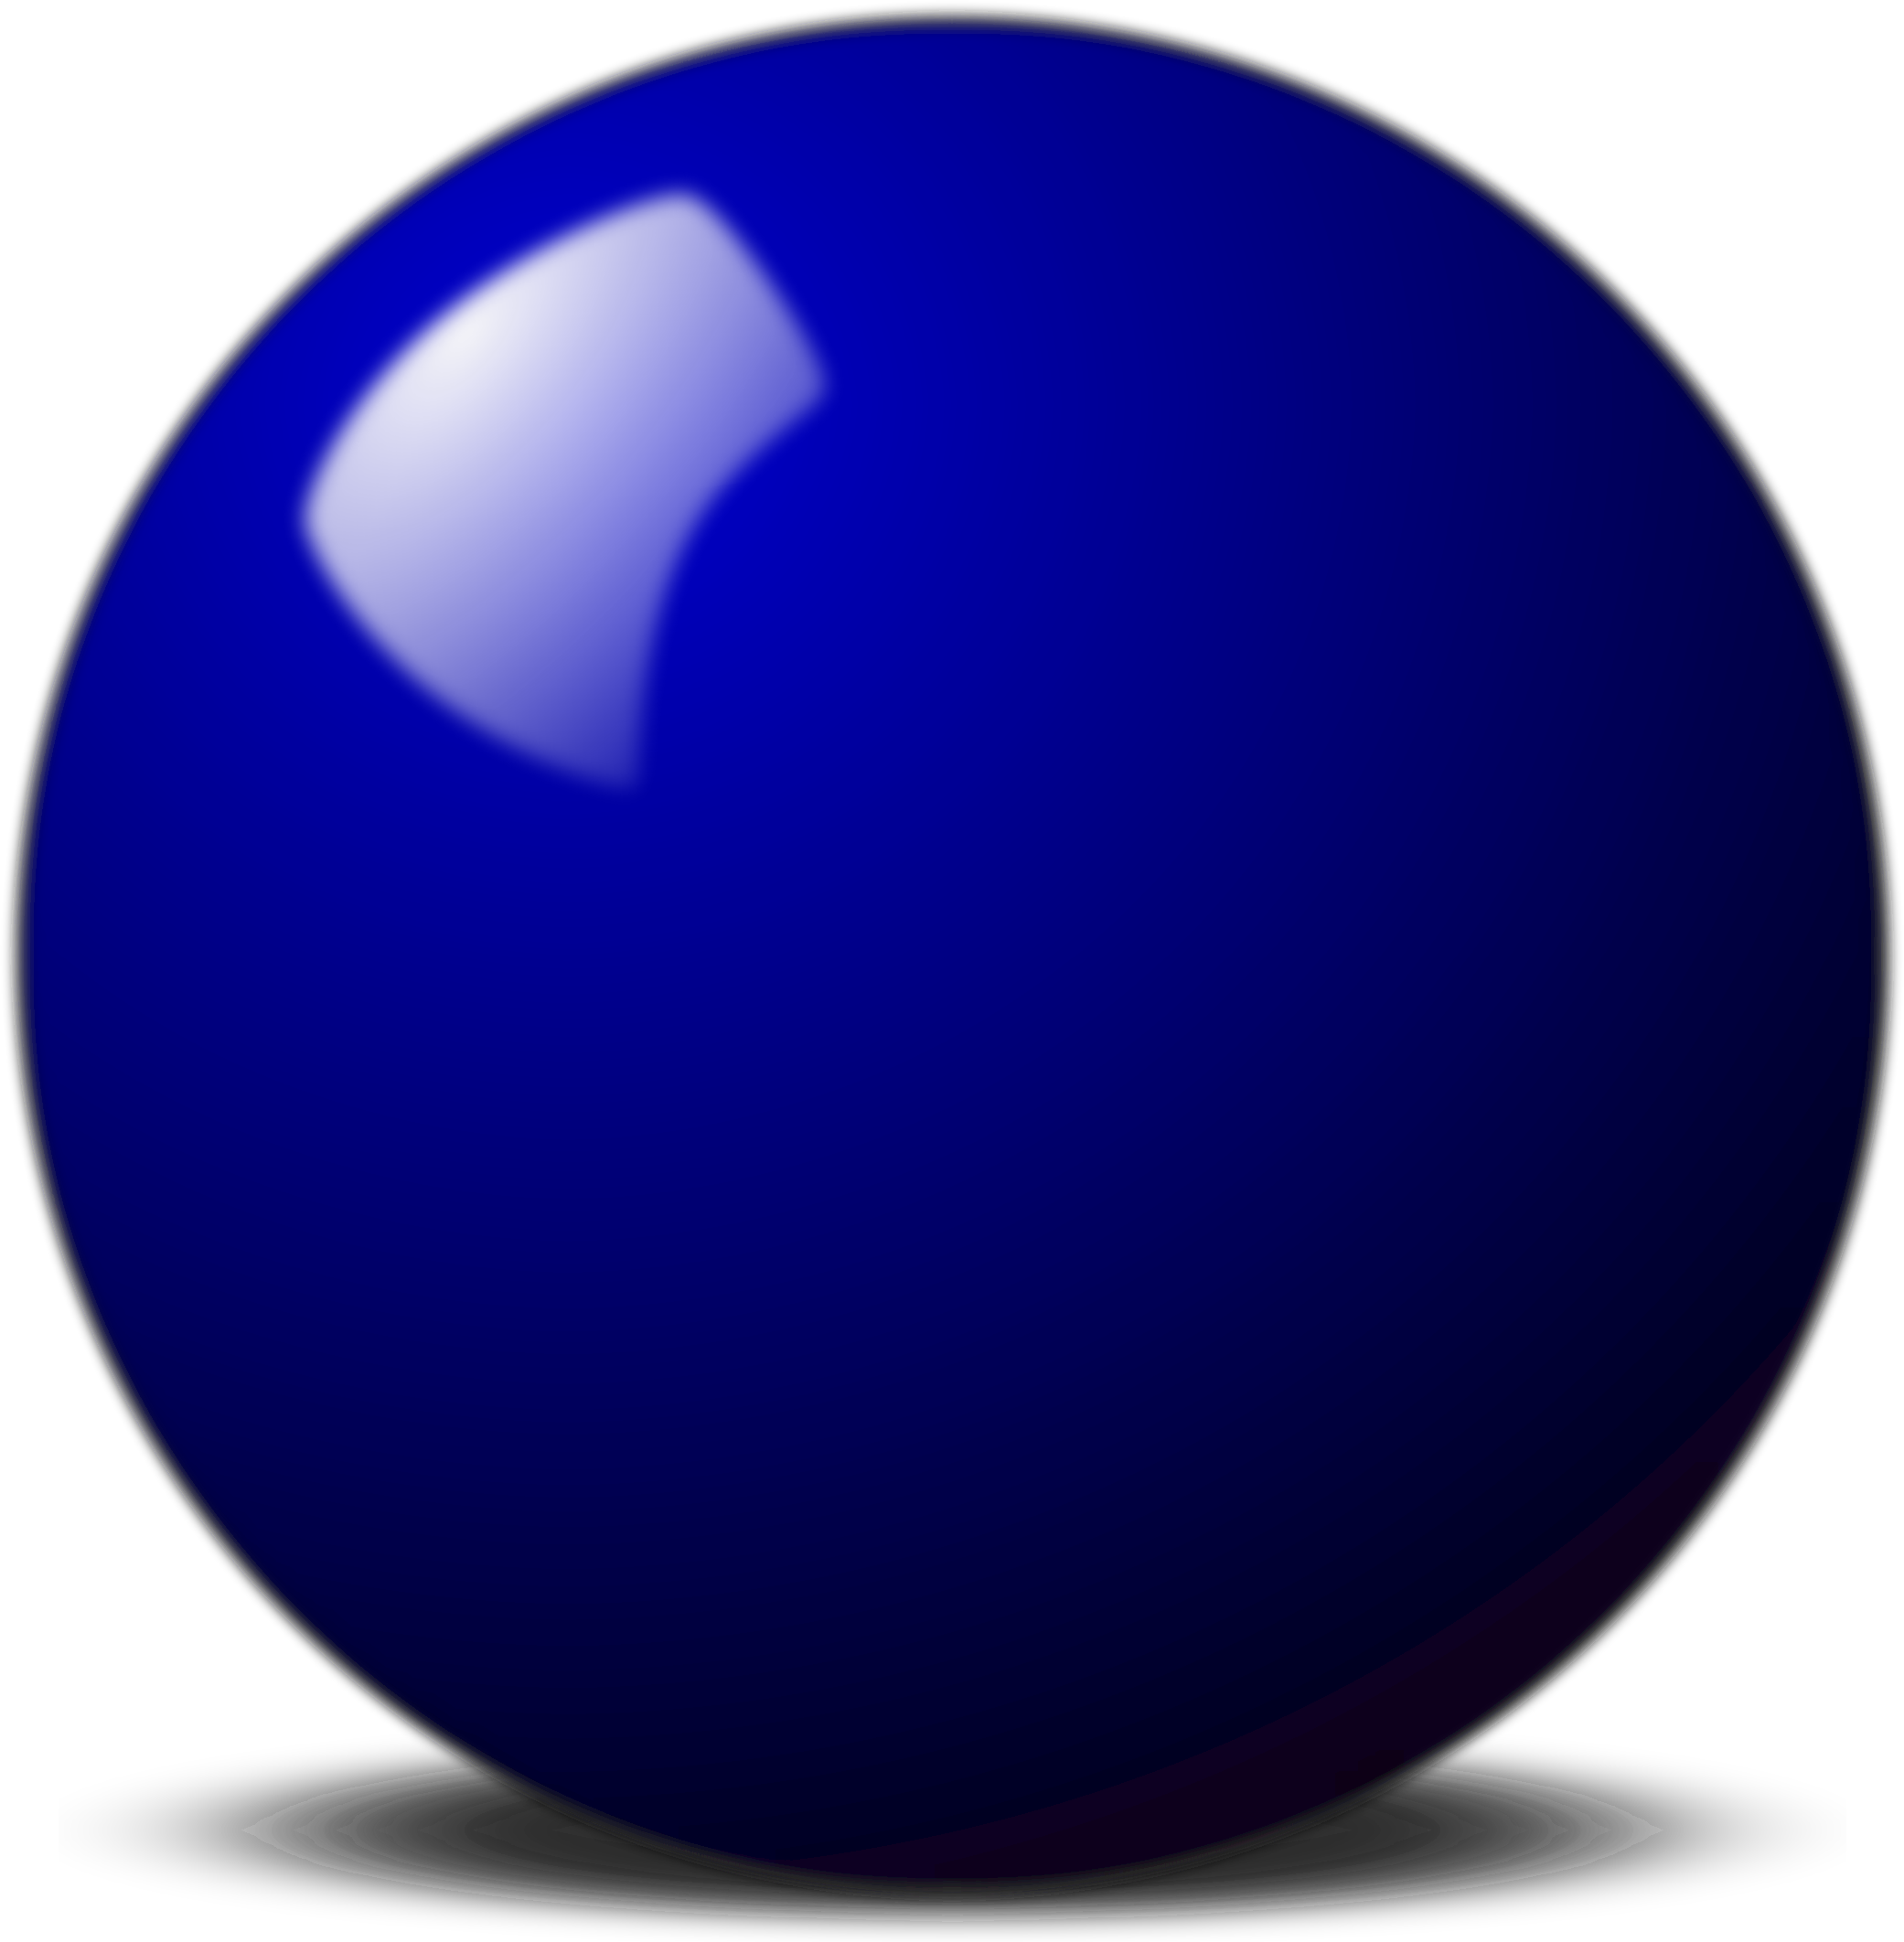 A Blue Ball With A Black Background